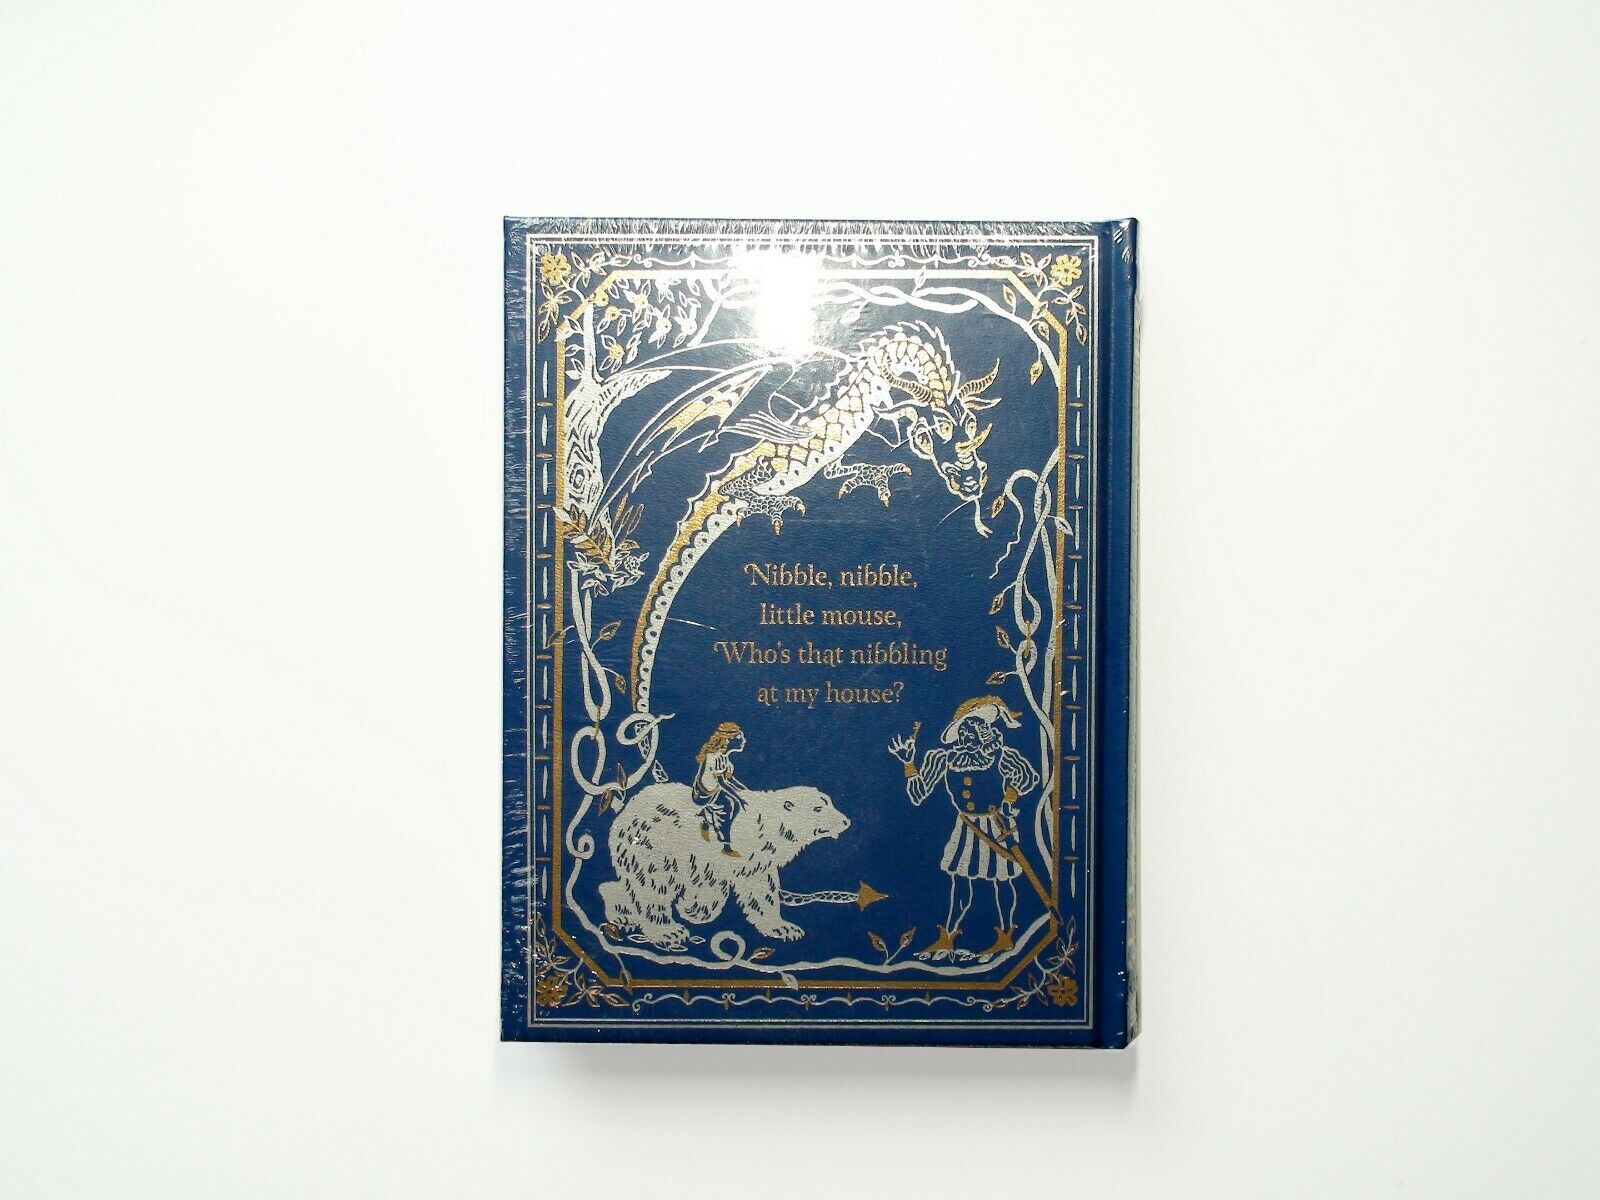 The Blue Fairy Book, Andrew Lang, Illustrated by H. J. Ford, Brand New, 2017